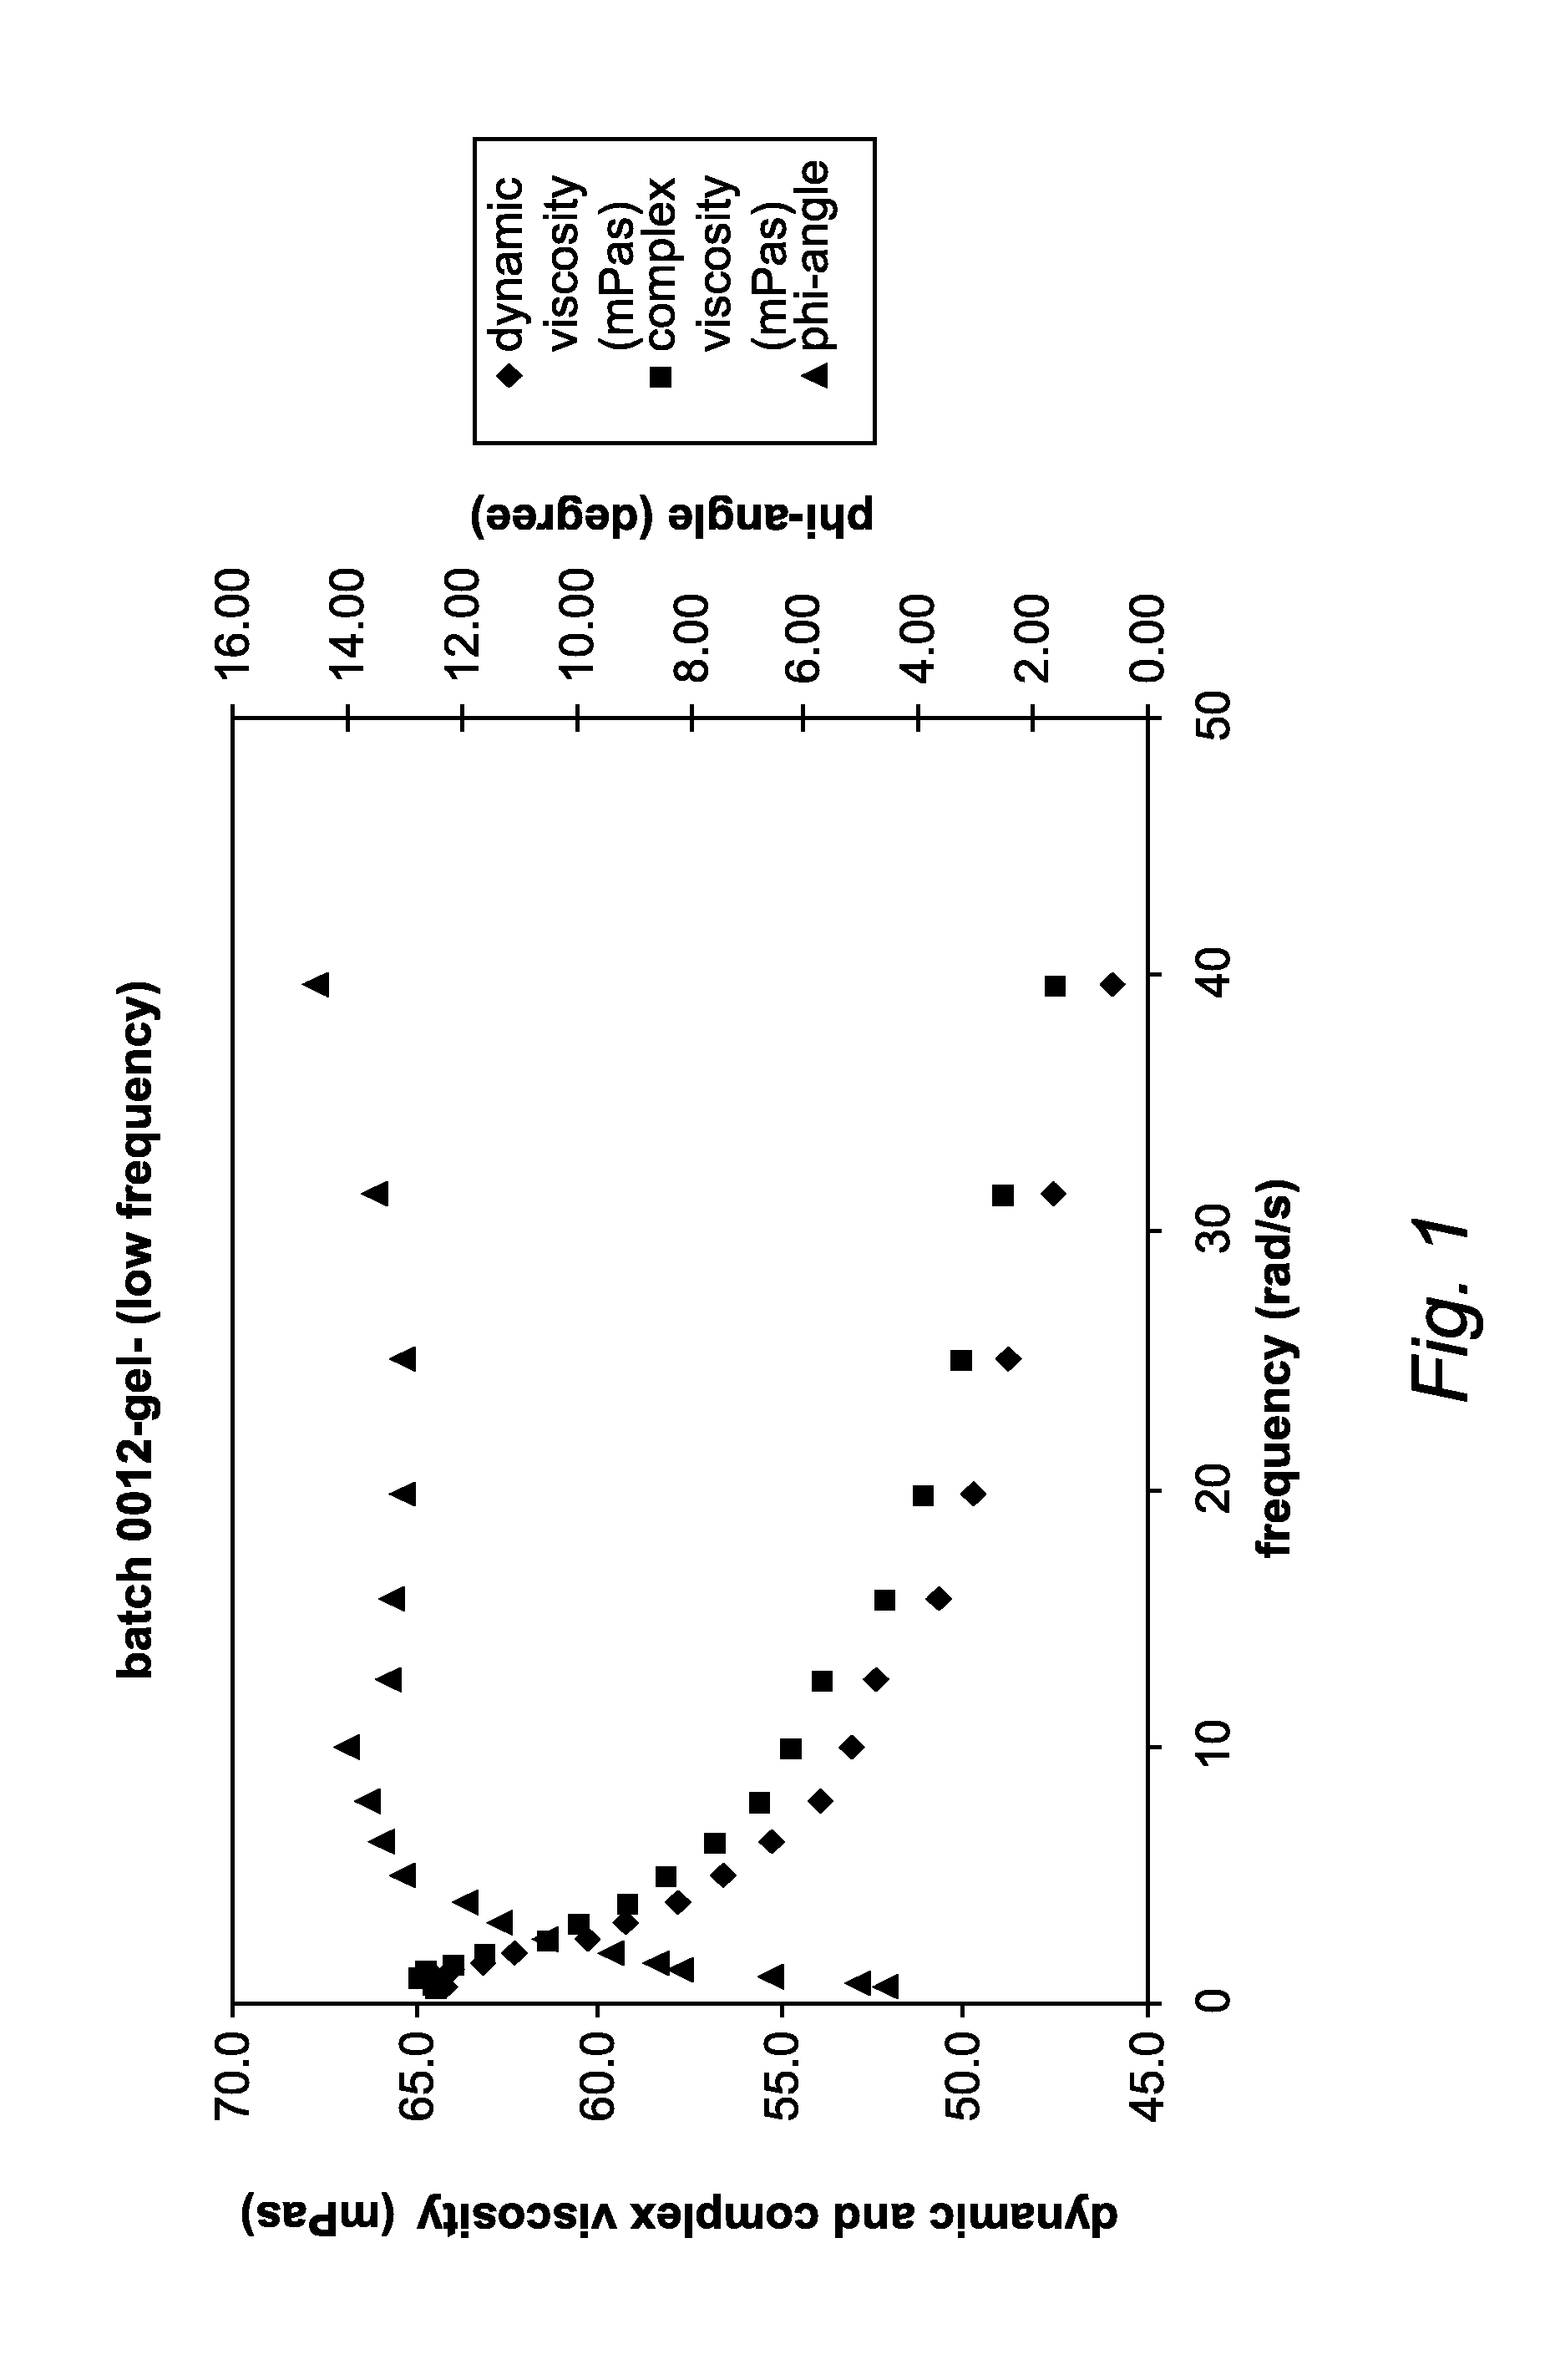 Vaginal lubricant comprising hyaluronic acid